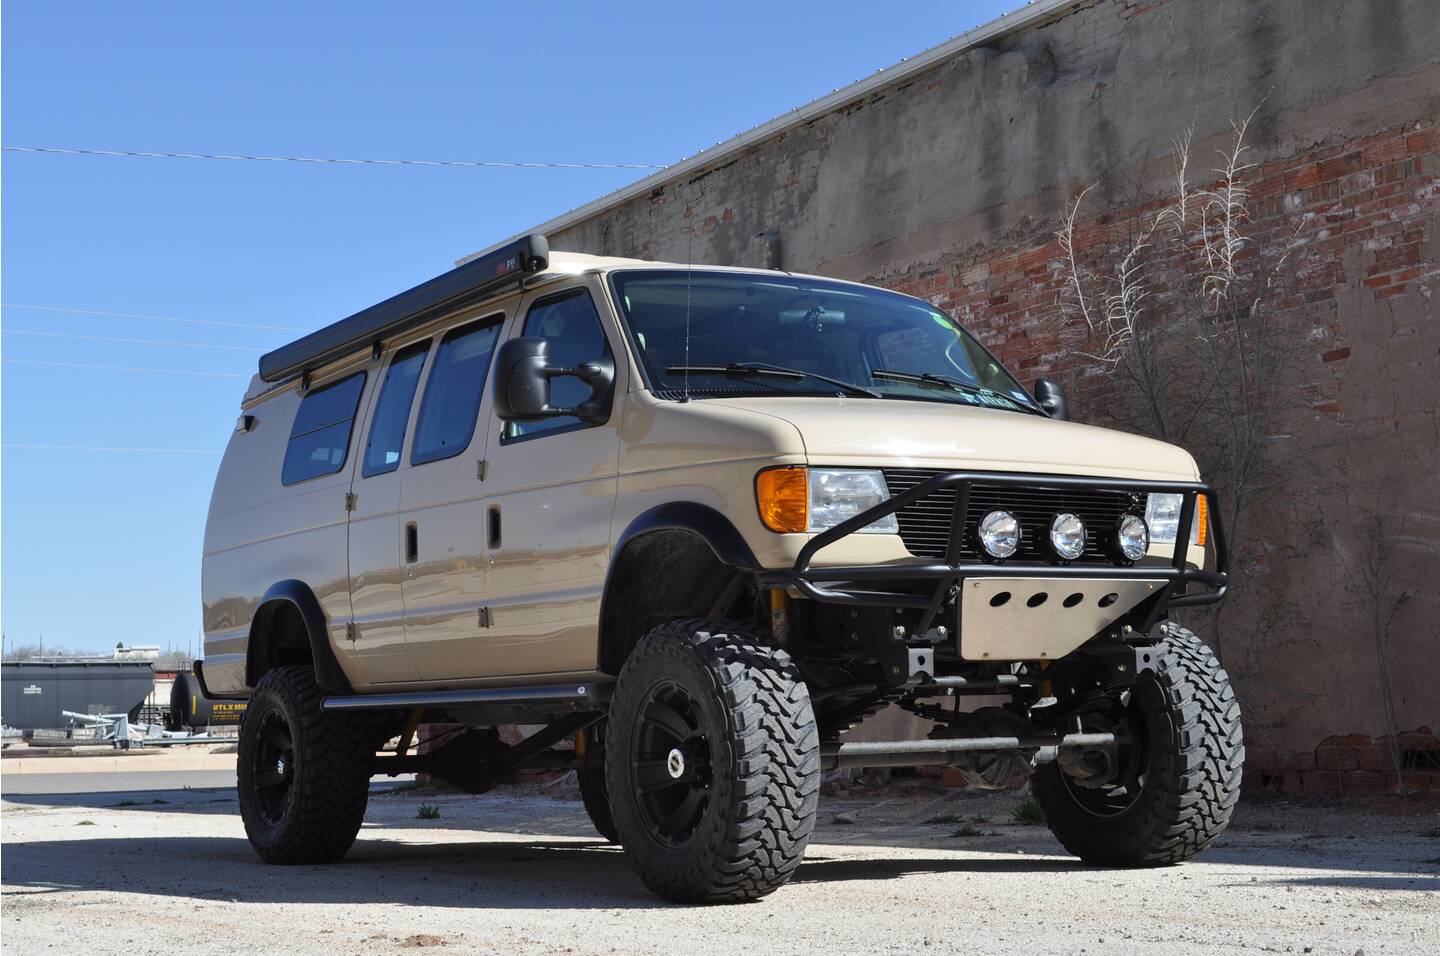  Sportsmobile  4x4 Vans Are All The Rage In Adventure Travel 